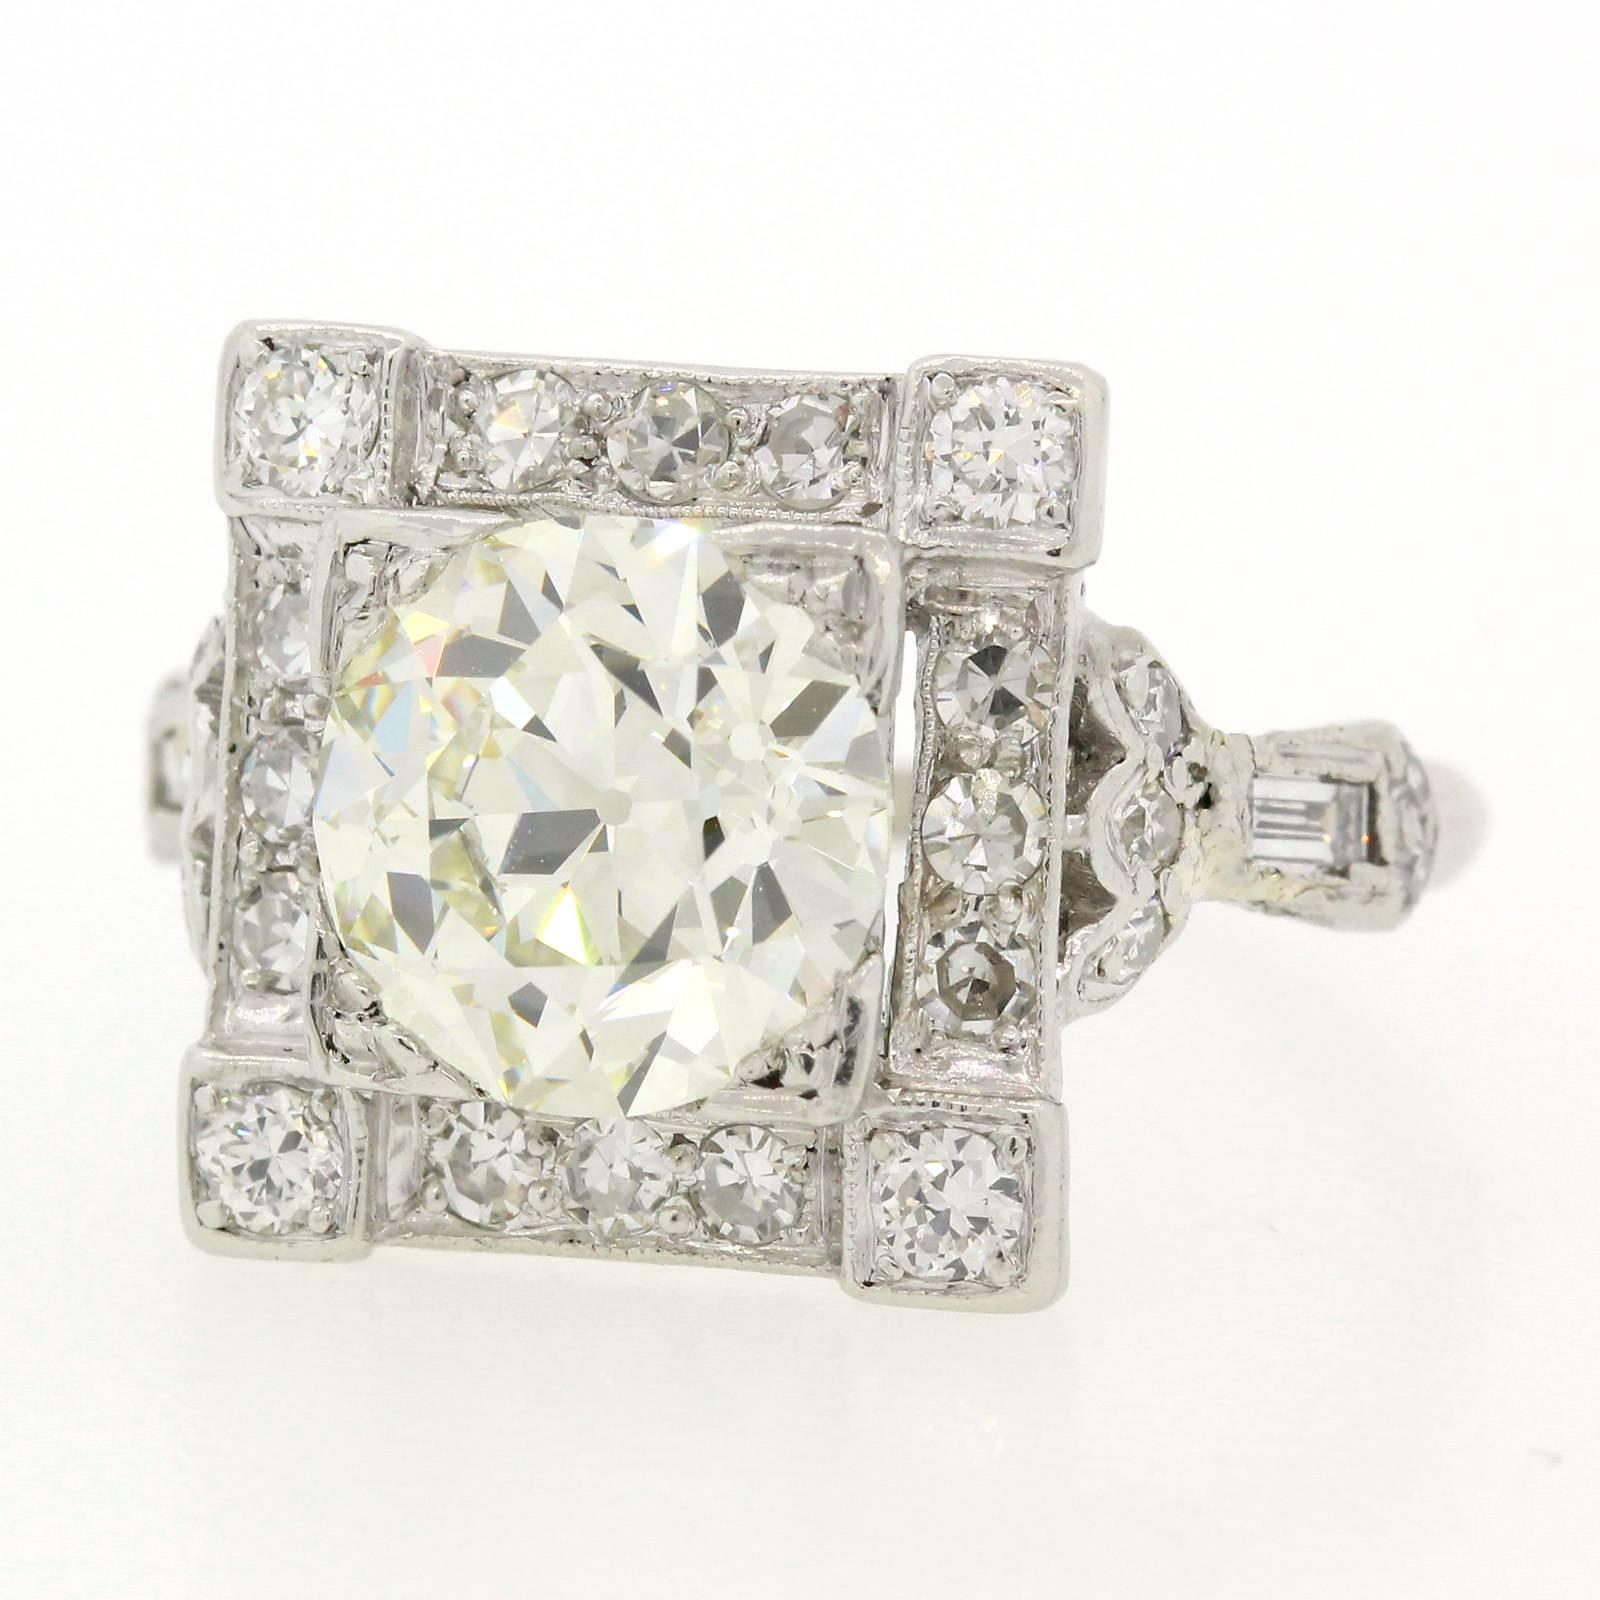 Splendorous Art Deco ring featuring a 2.40 carat Old European Cut Diamond, certified E.G.L. USA N color - VVS2 clarity.  The diamond is set in a square platinum setting accented by four Old European Cut and twelve old Single Cut Diamonds.  The sides